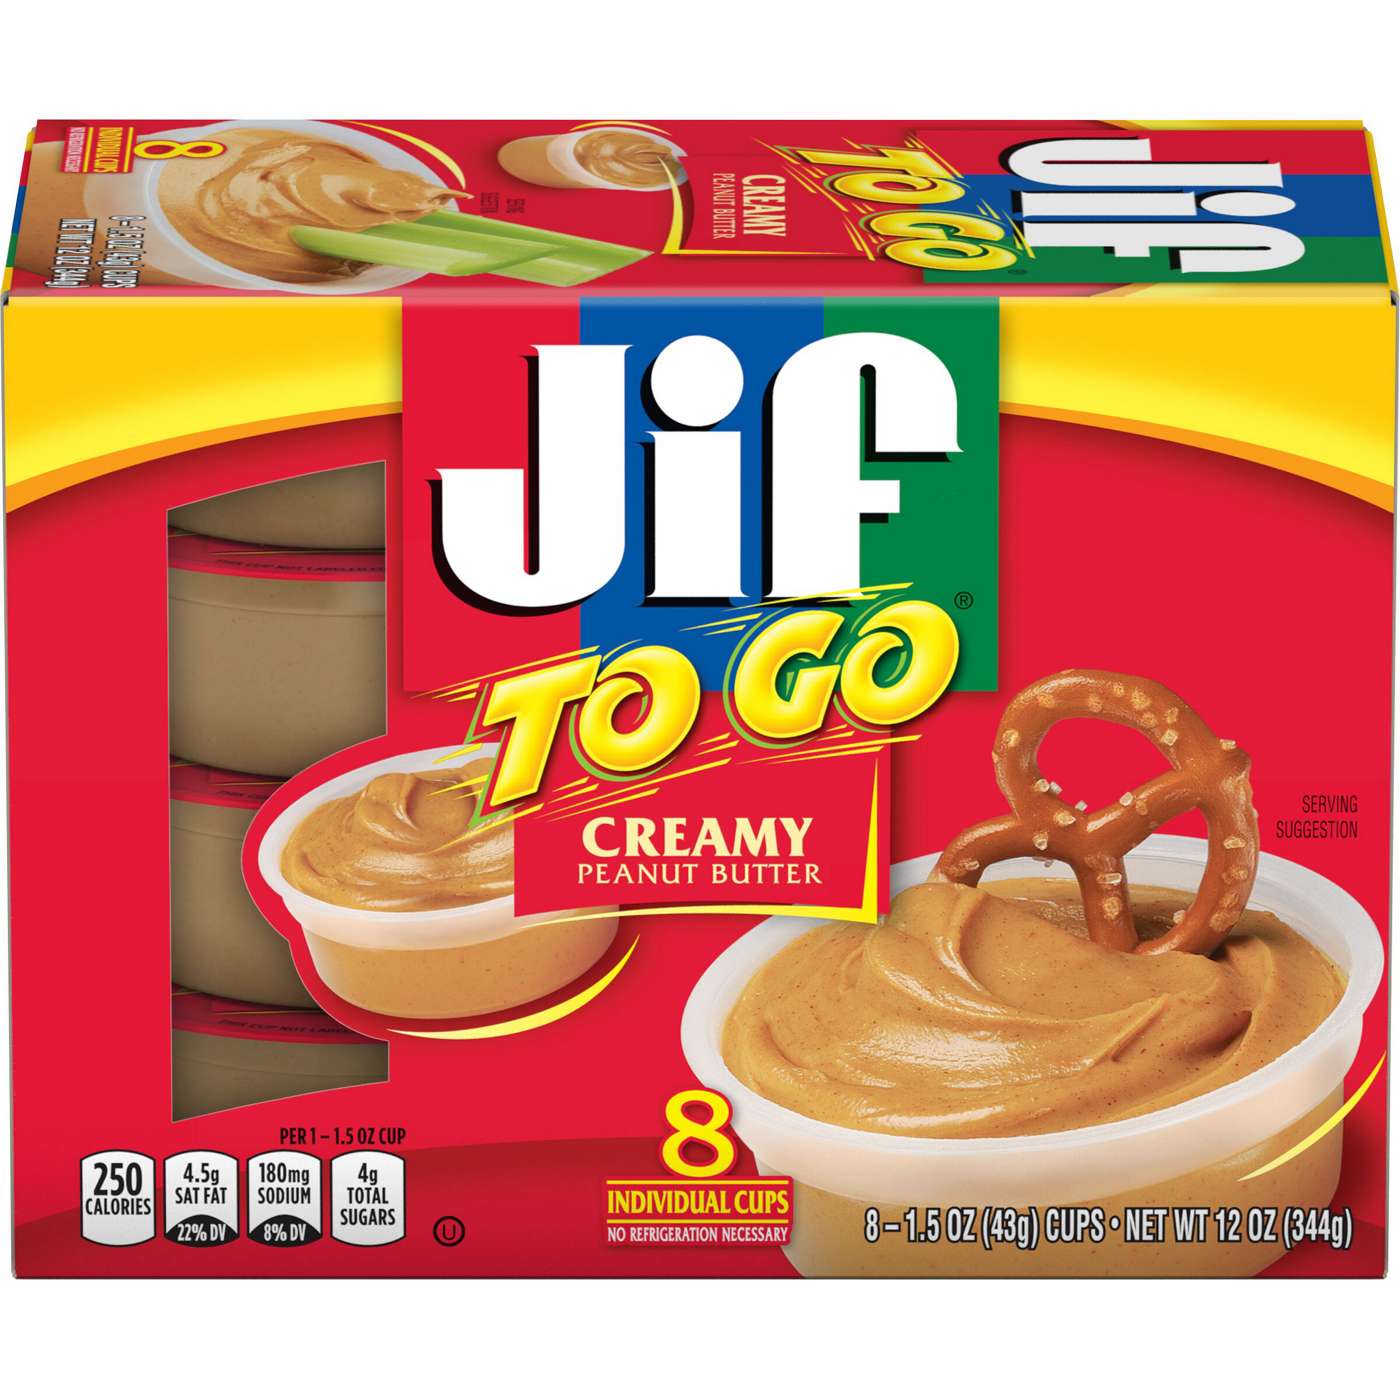 Jif To Go Creamy Peanut Butter 8 pk Cups; image 1 of 5